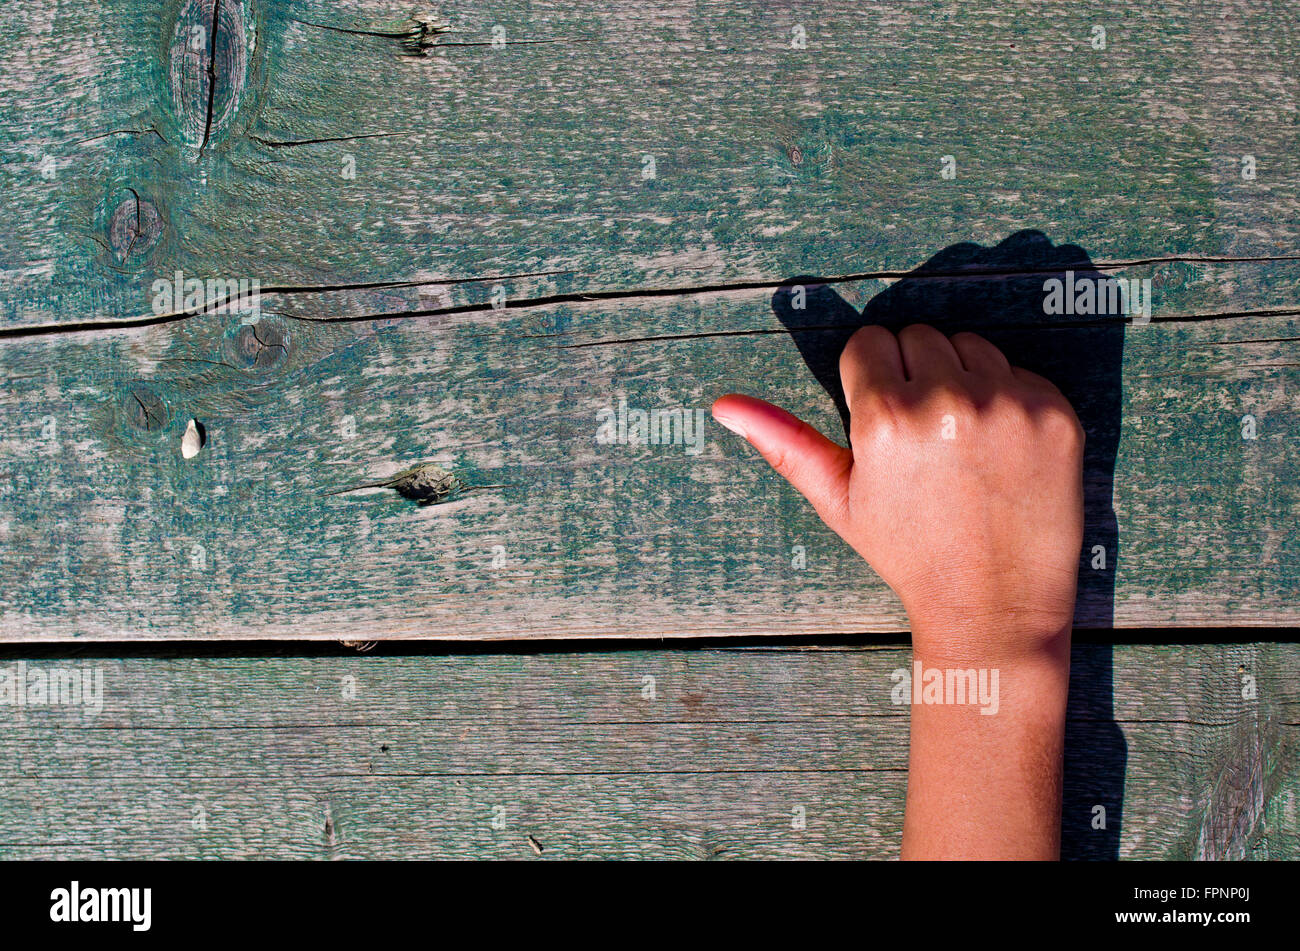 a hand tells us the right number, one, two, three, four, five out of an aged wooden table Stock Photo